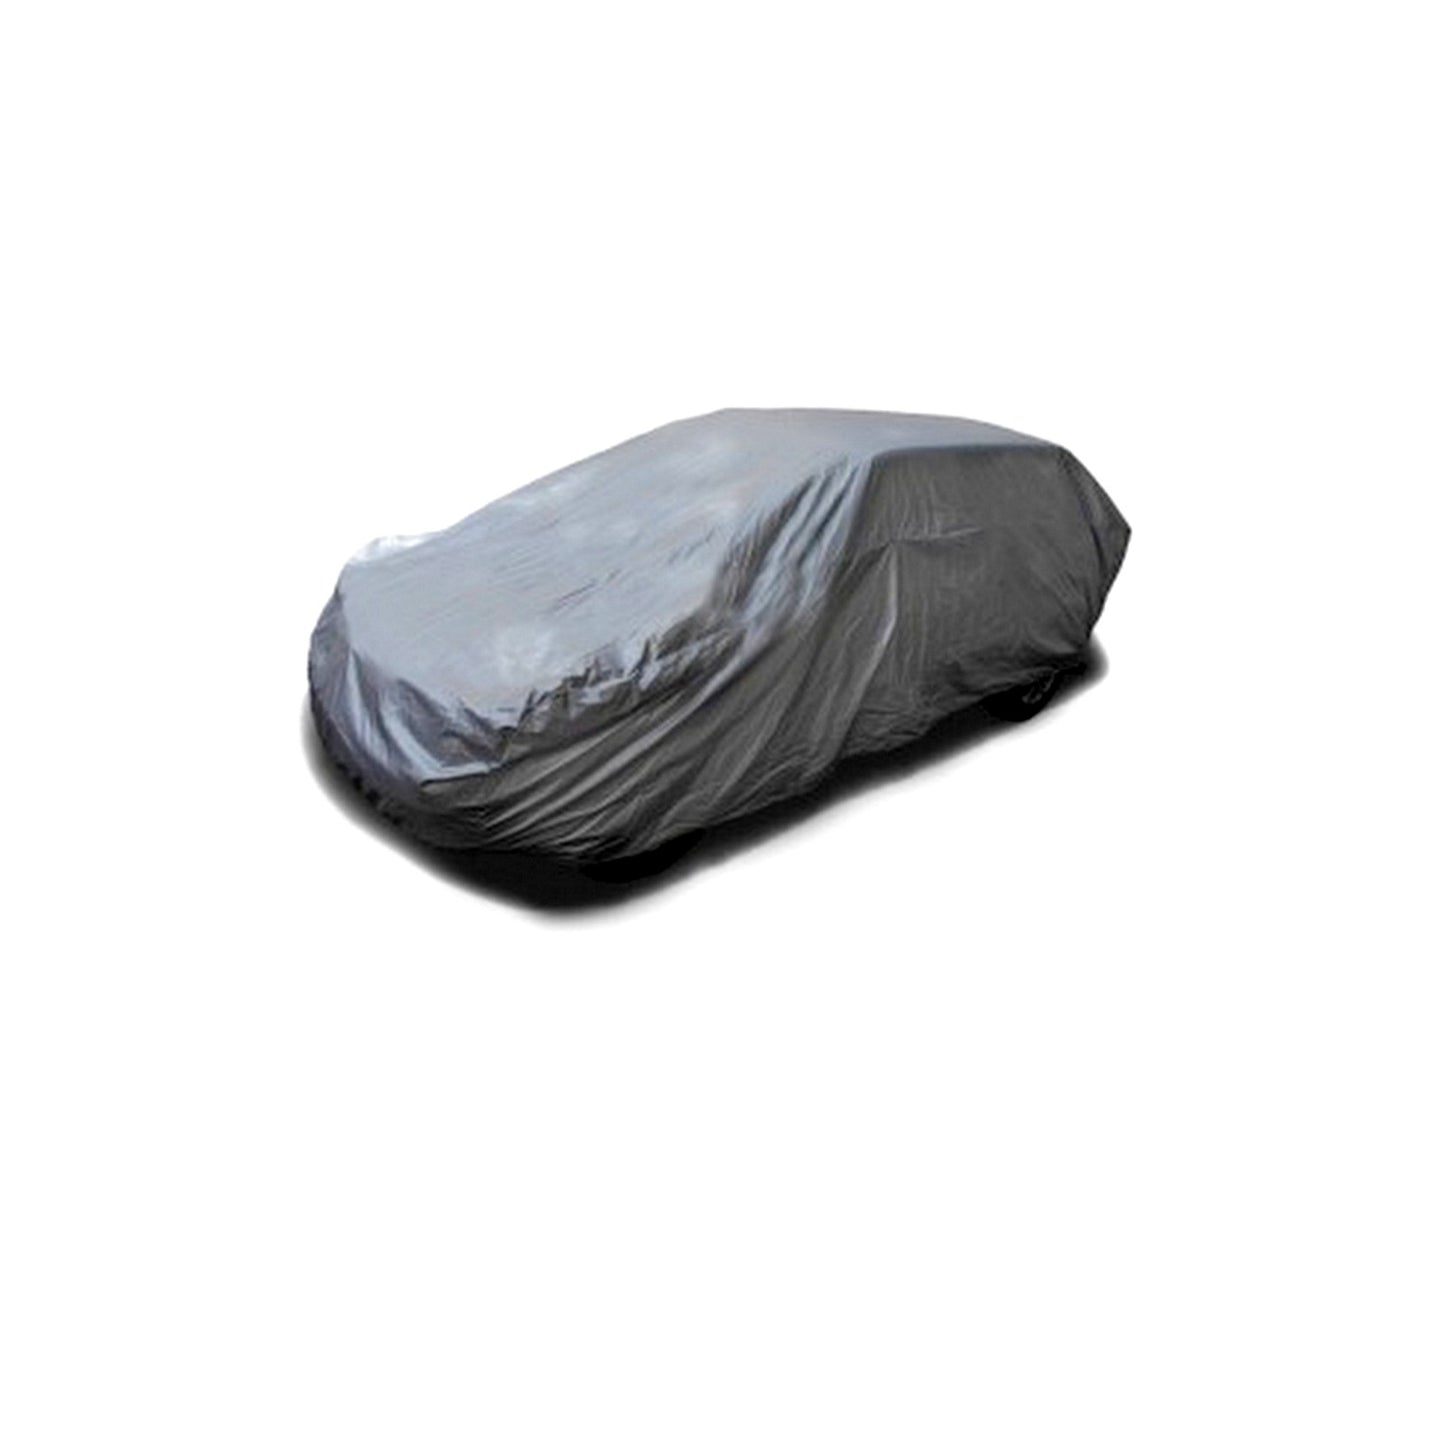 TOP COVER WITH FLEECE IMPORTED FOR DAIHATSU MIRA